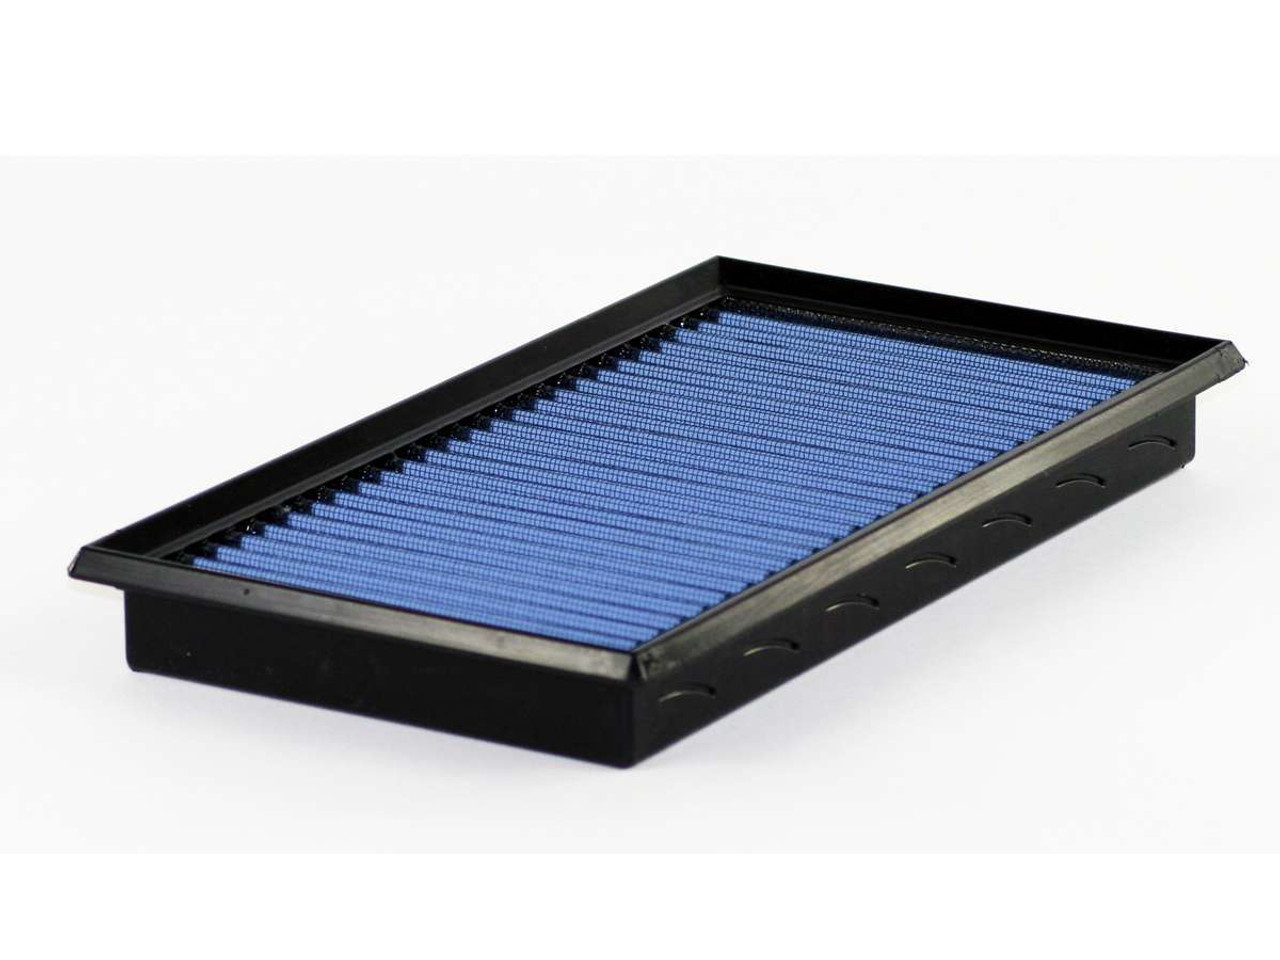 Magnum FLOW OE Replaceme nt Air Filter w/ Pro 5R